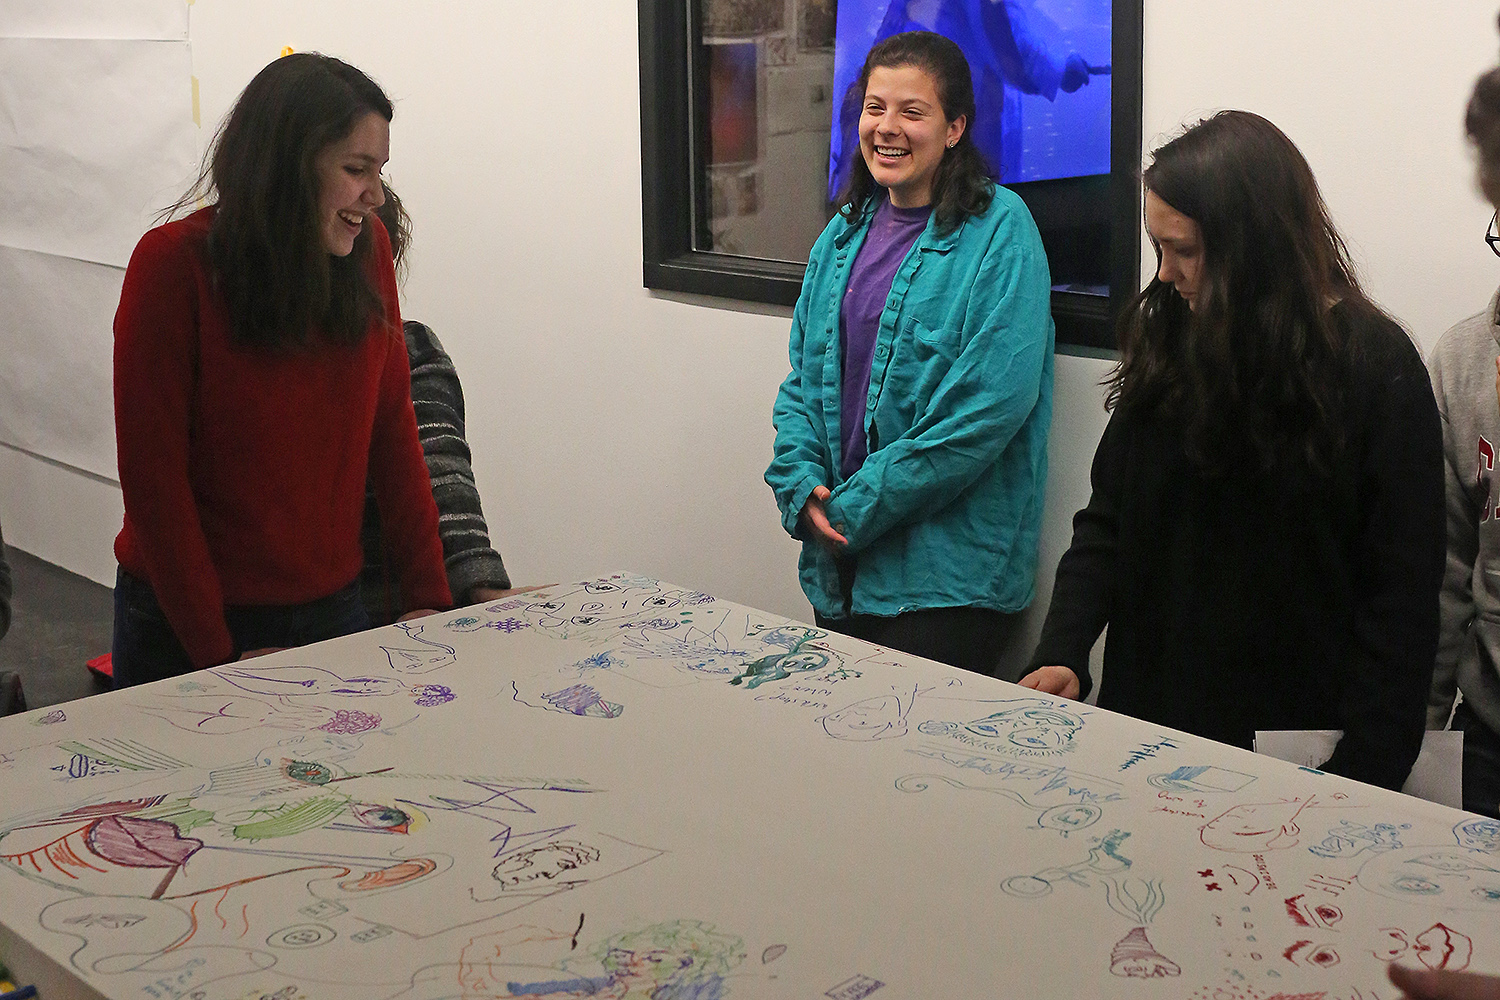 Students gather to celebrate the opening of the Workshop, a student run art space on campus